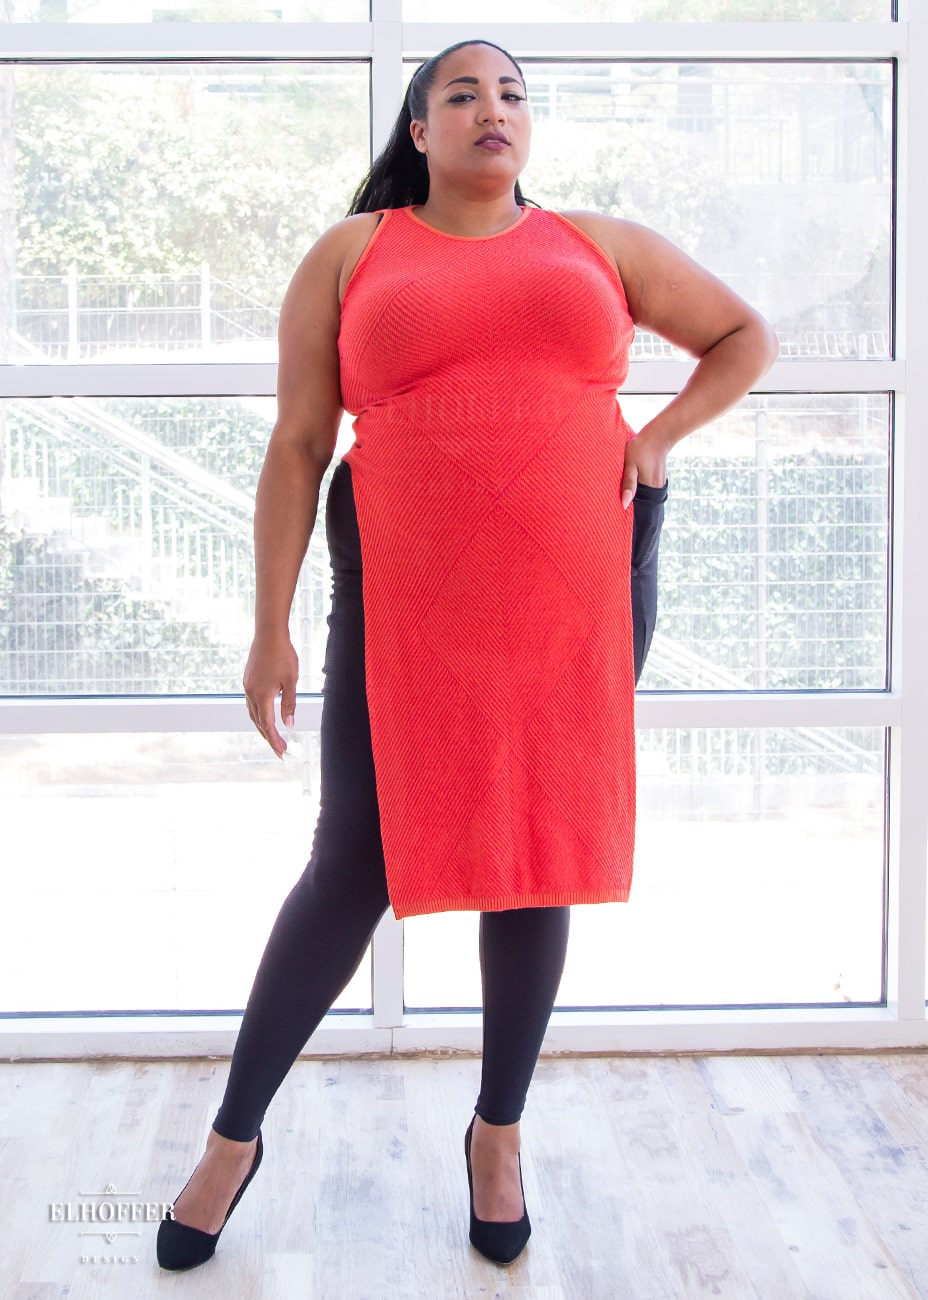 Tas, a medium dark skinned size 2XL model with long dark hair, is wearing a pullover cropped sleeveless knit top with front and back flaps in a medium orange.